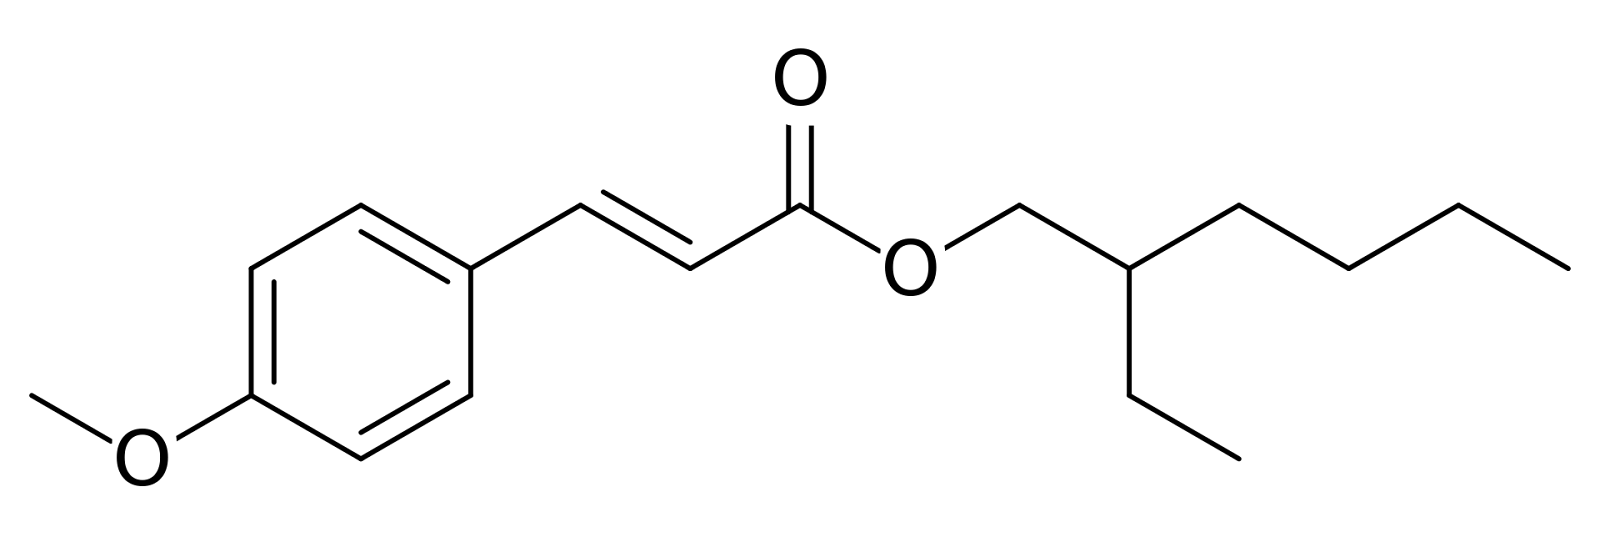 Chemical structure of Octyl Methoxycinnamate